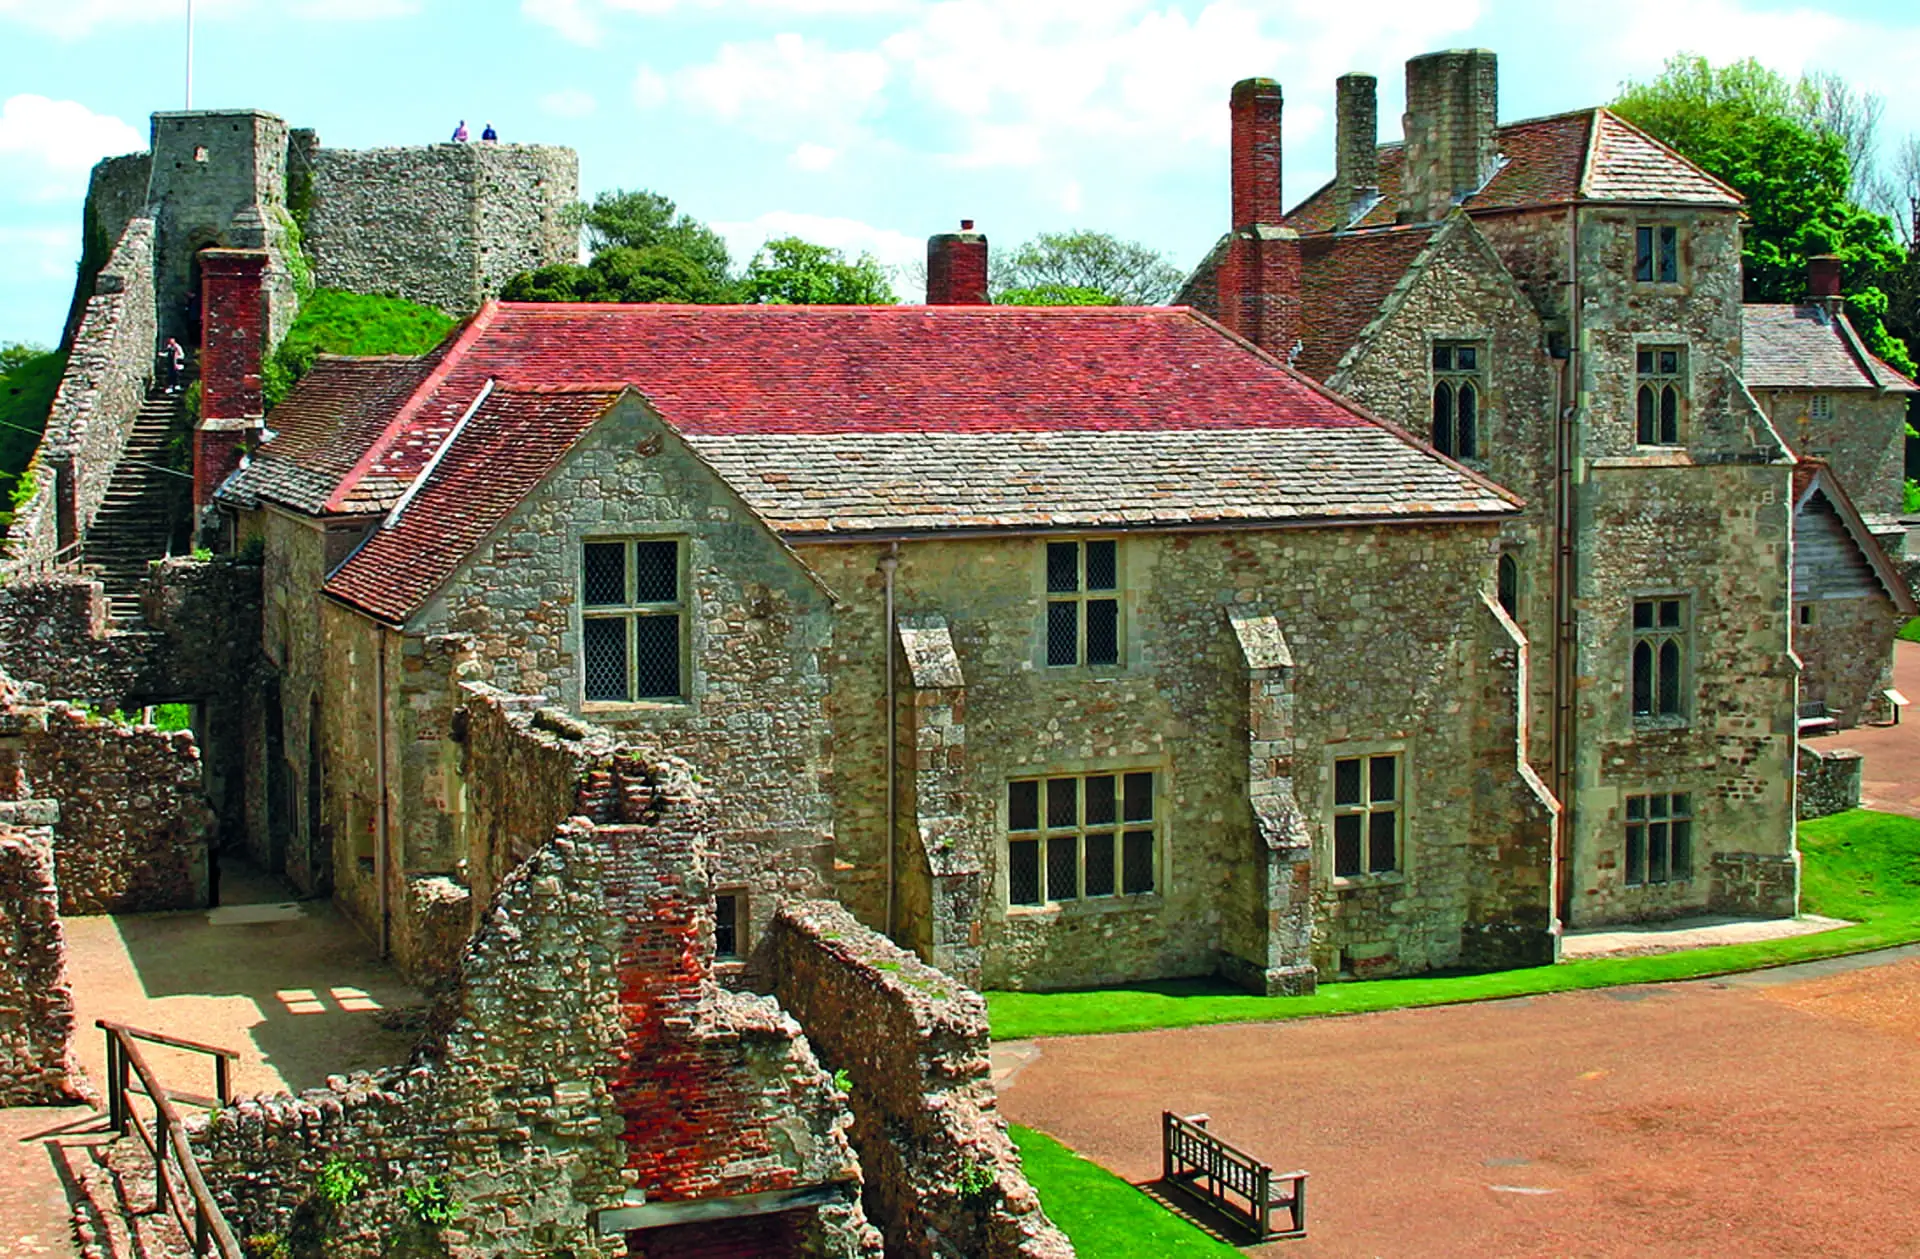 The exterior of the former Governor’s House at Carisbrooke Castle, now home to the museum